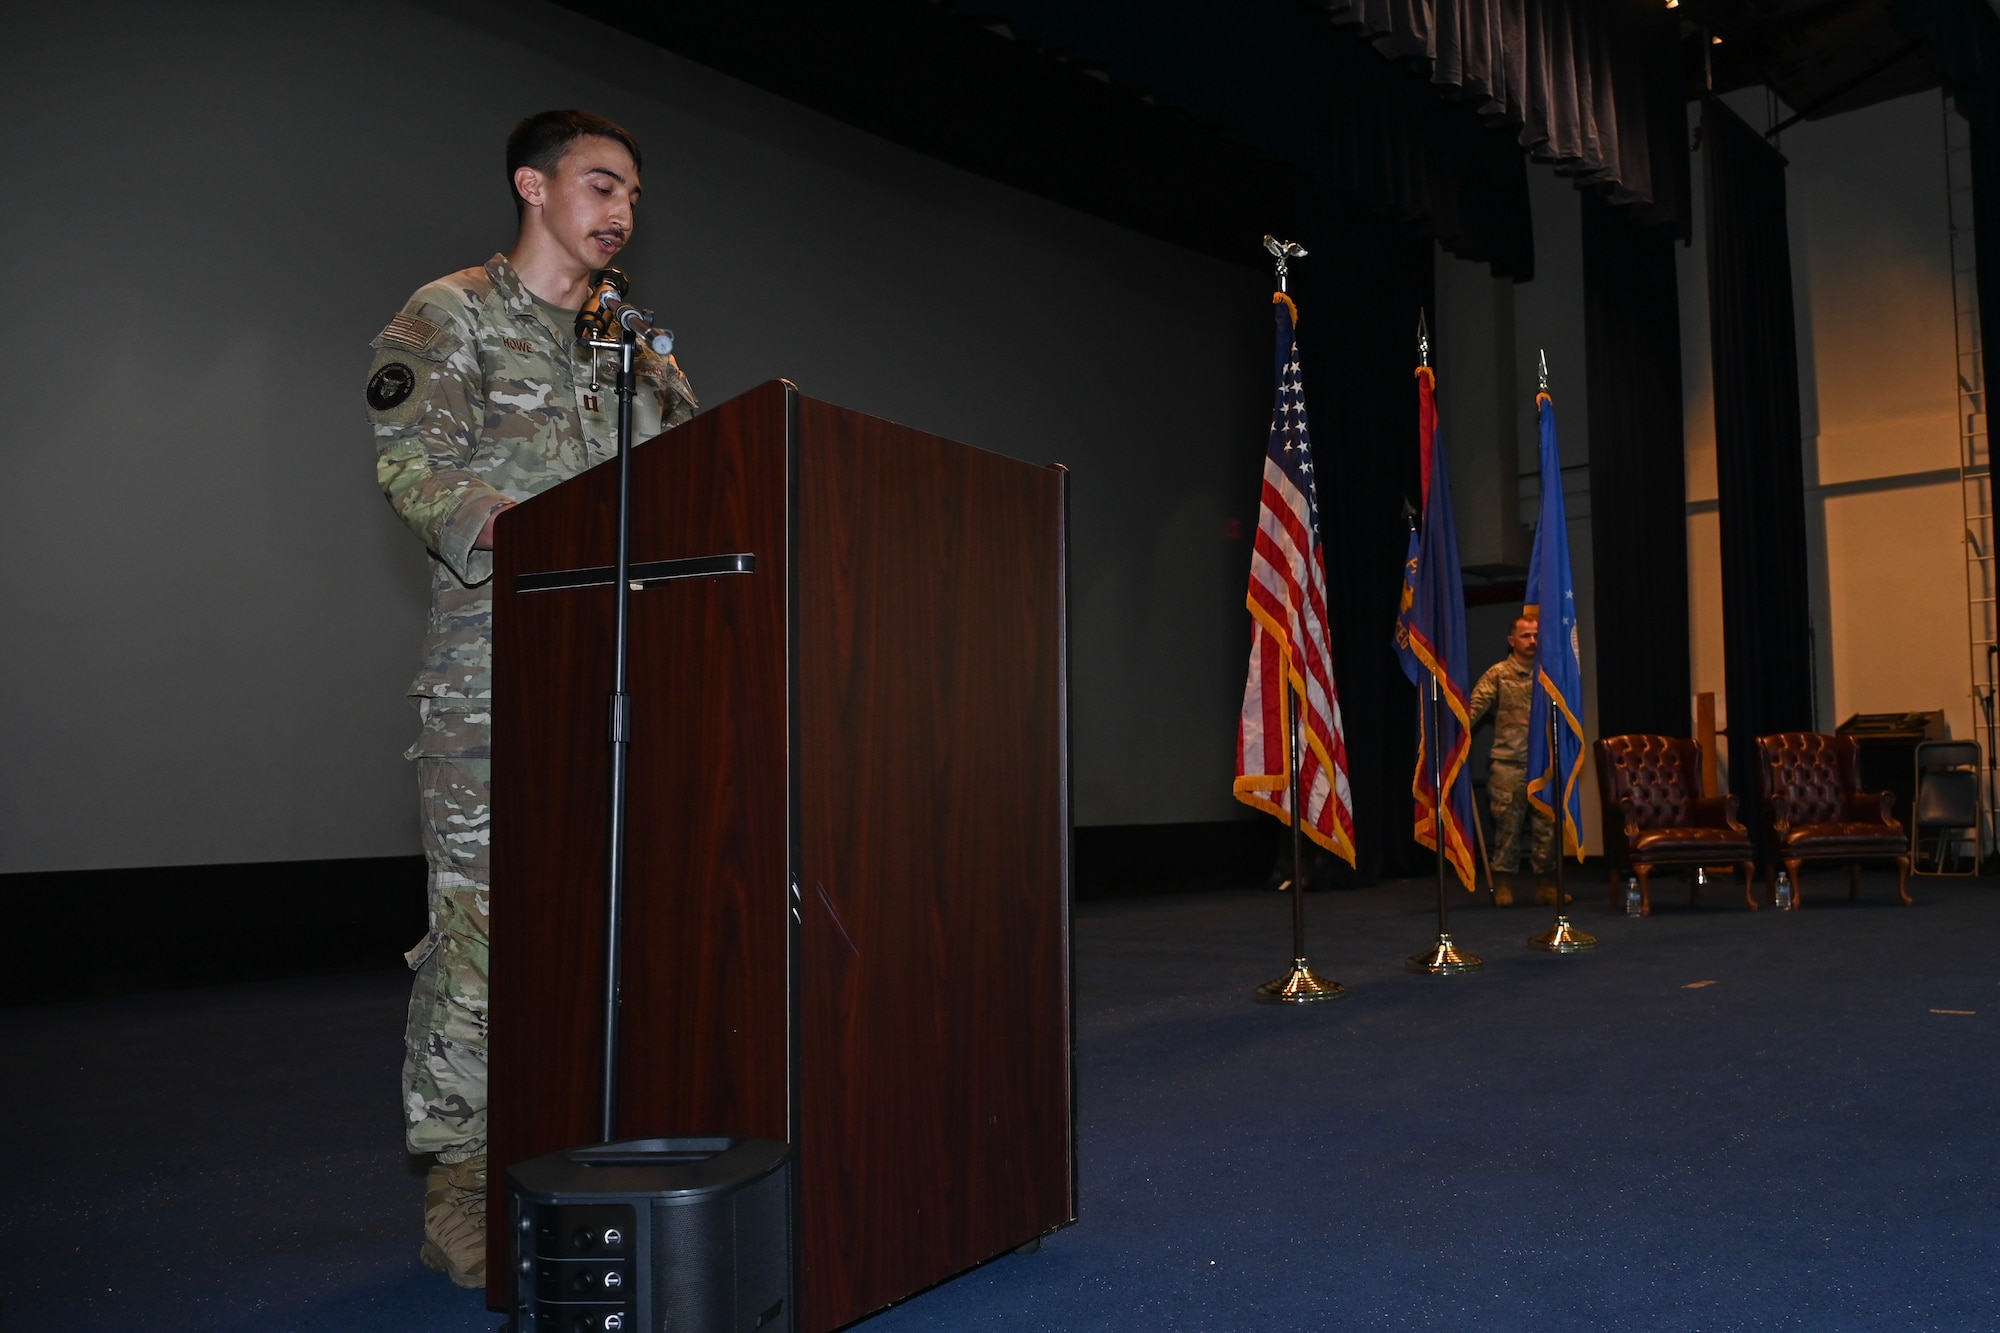 An Airman stands on the stage behind a podium and speaks to the audience.